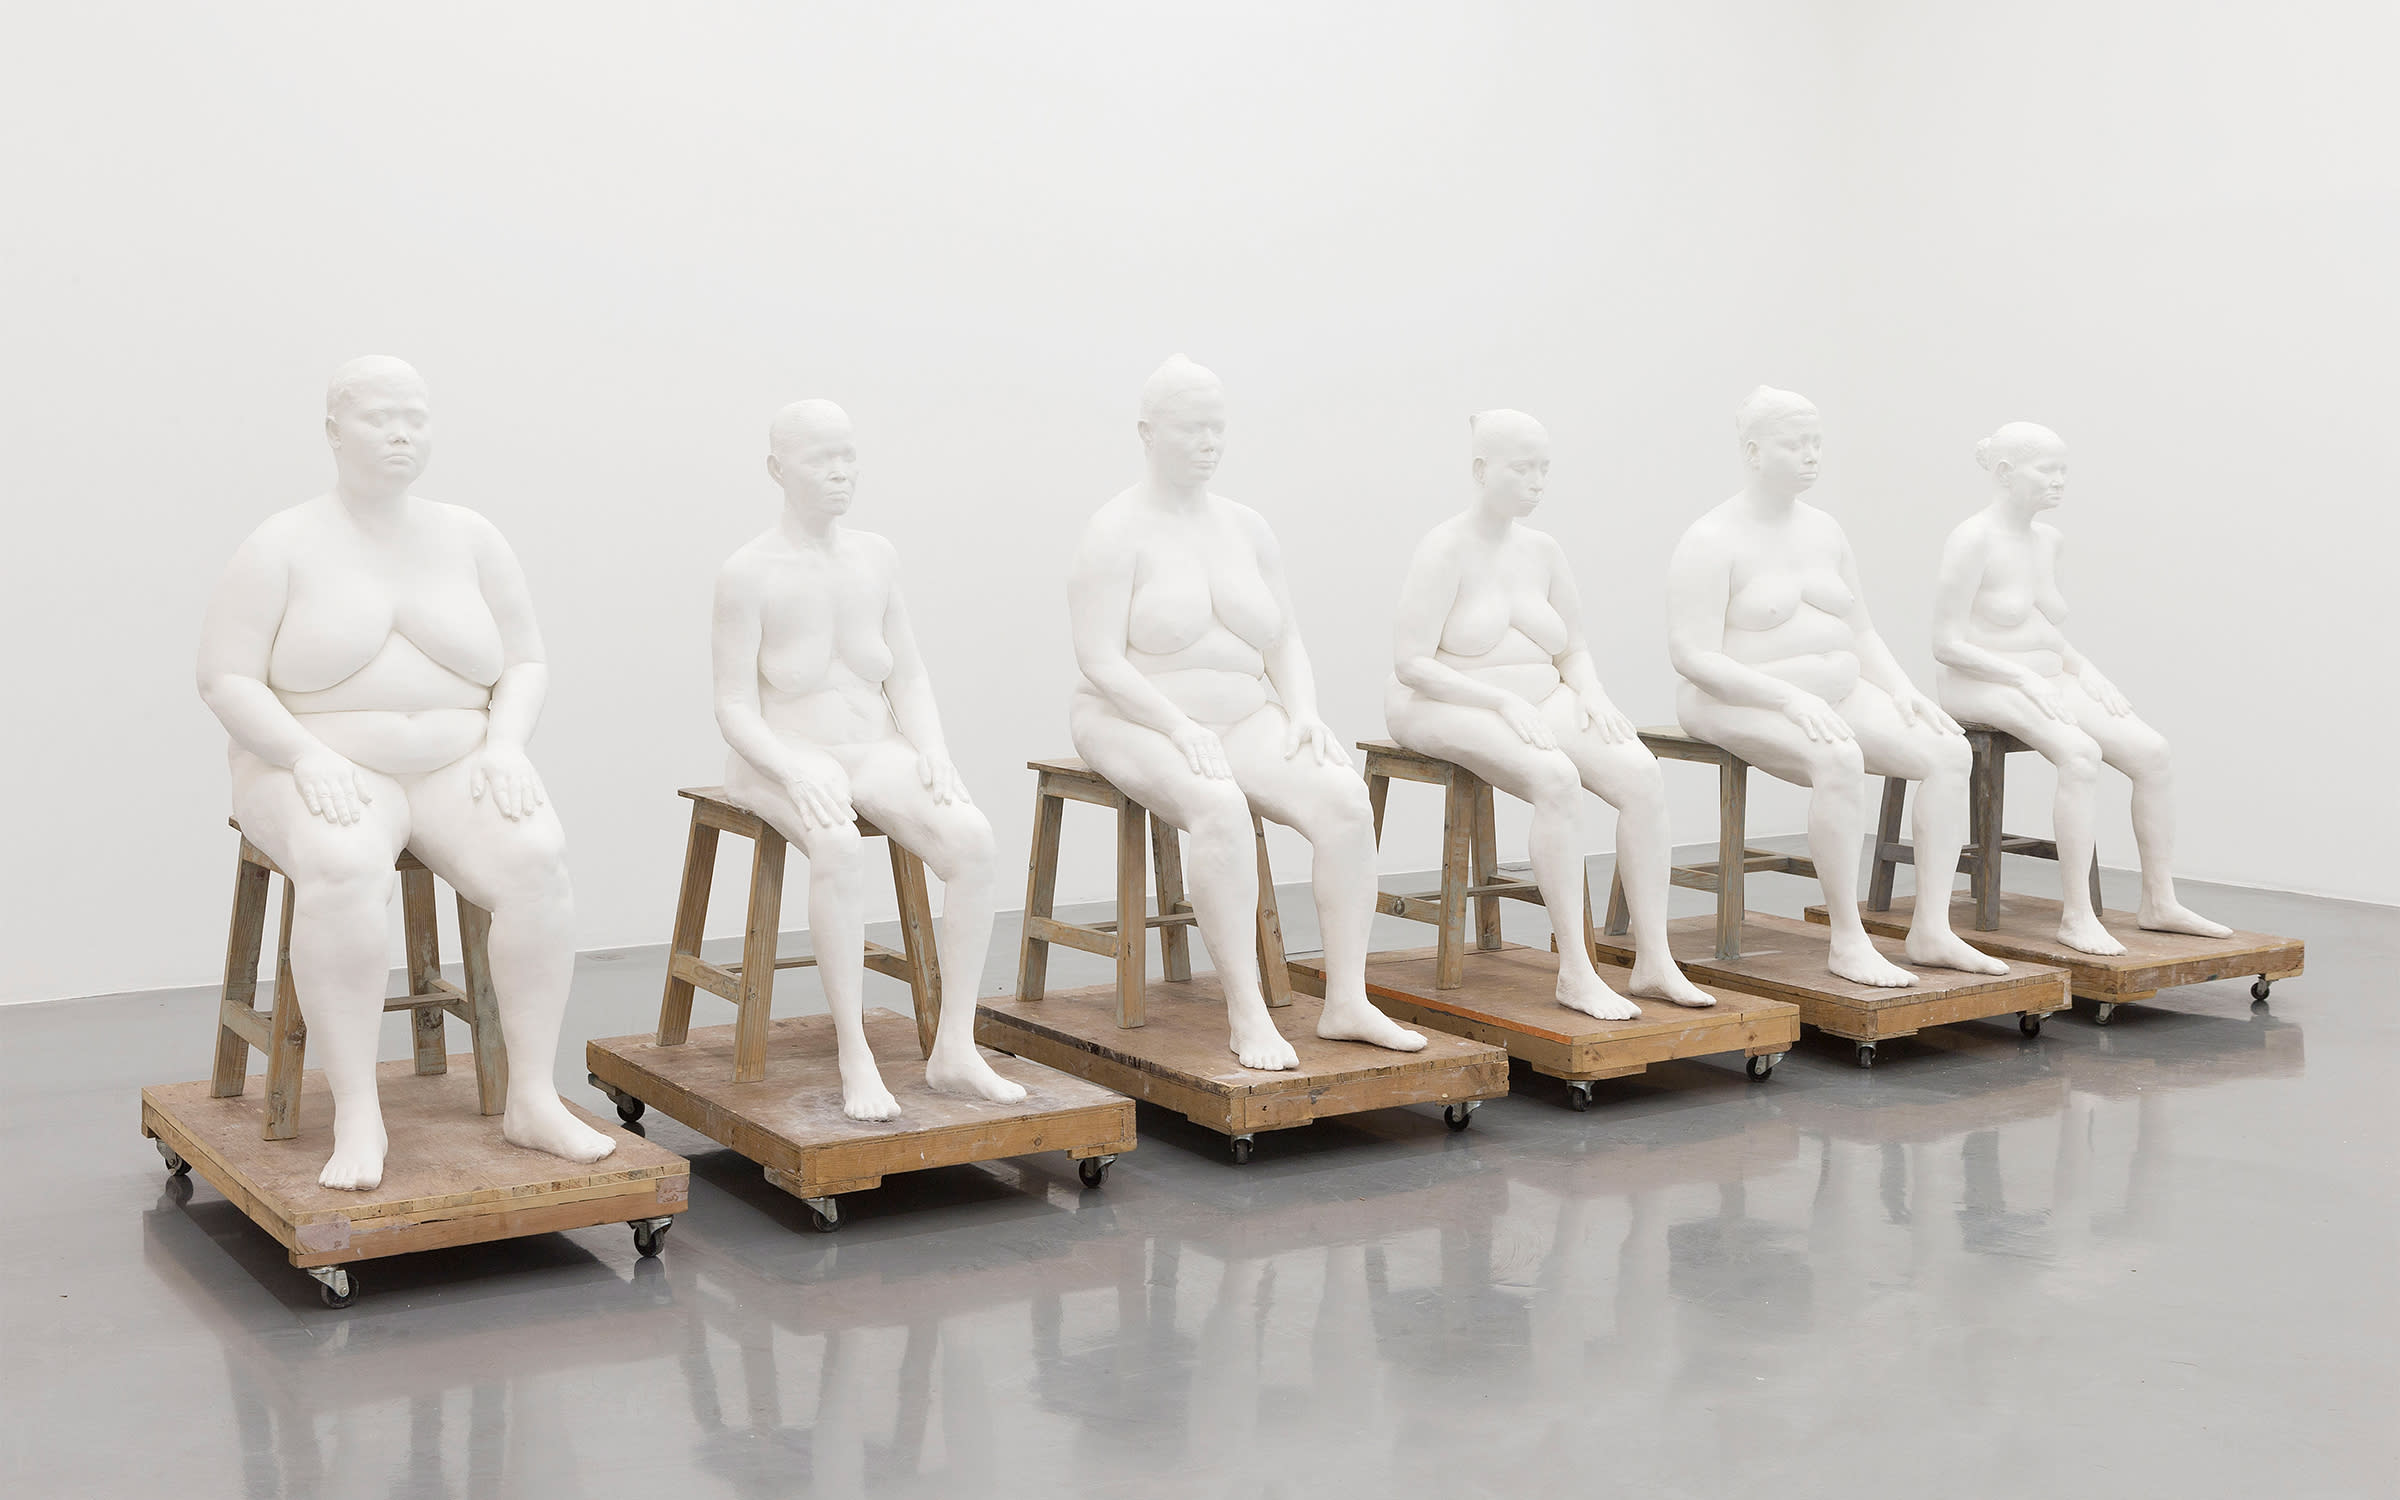 Bharti Kher, Six women, 2012-2014. Courtesy of the artist and Perrotin, Paris, Hong Kong, New York, Seoul, Shanghai, and Tokyo. Photo by Claire Dorn.